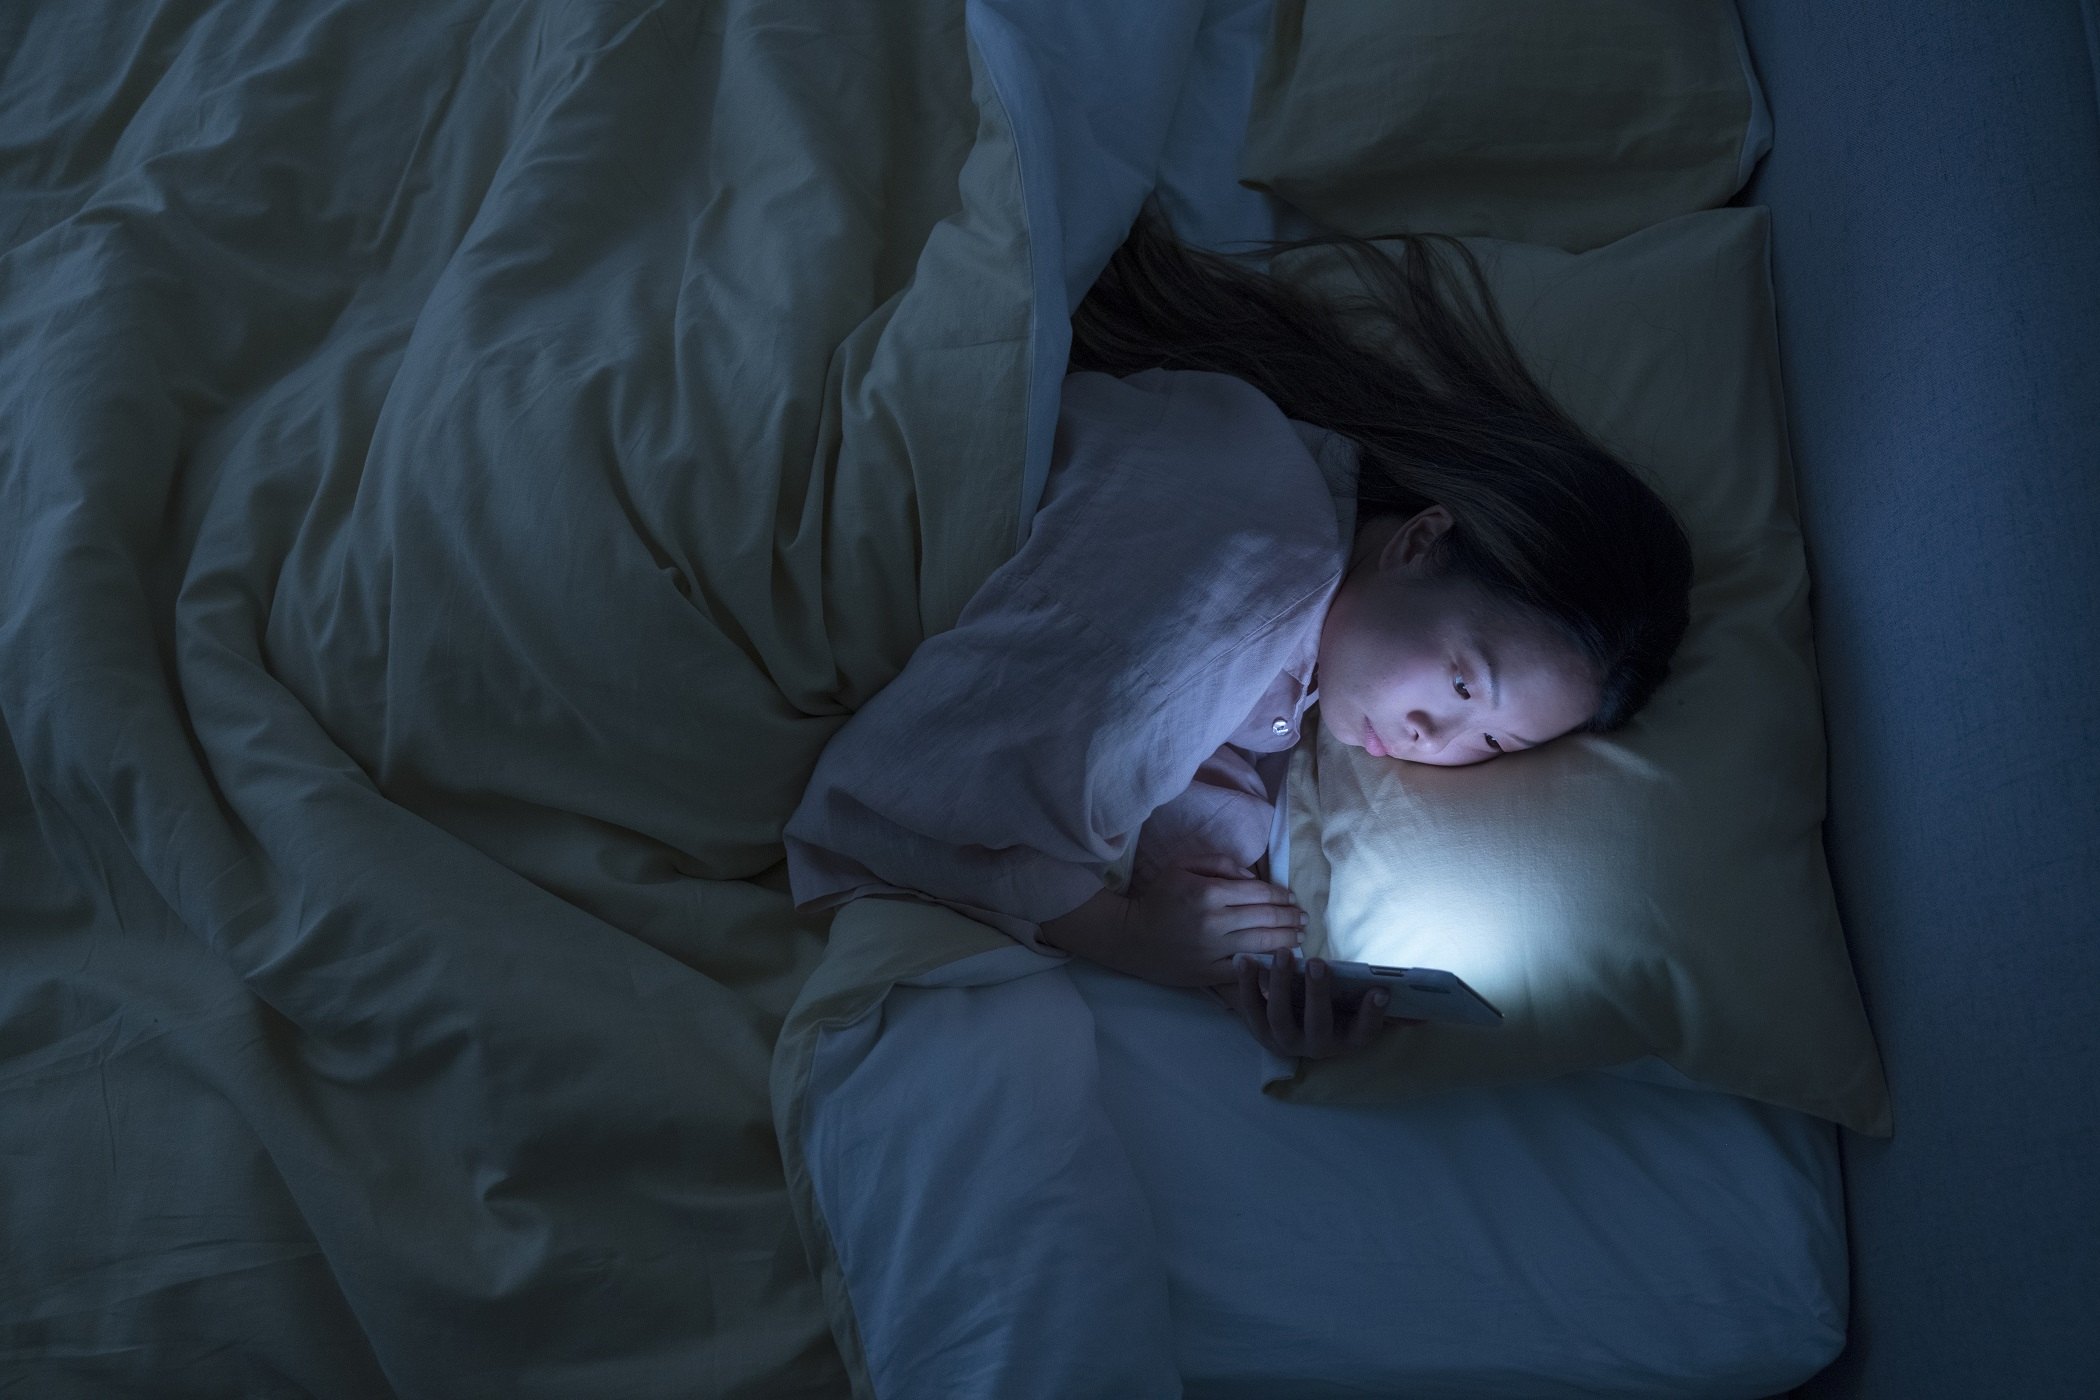 Most respondents who use their phone before falling asleep (78%) admit that it leads them to fall asleep later than they would like to.